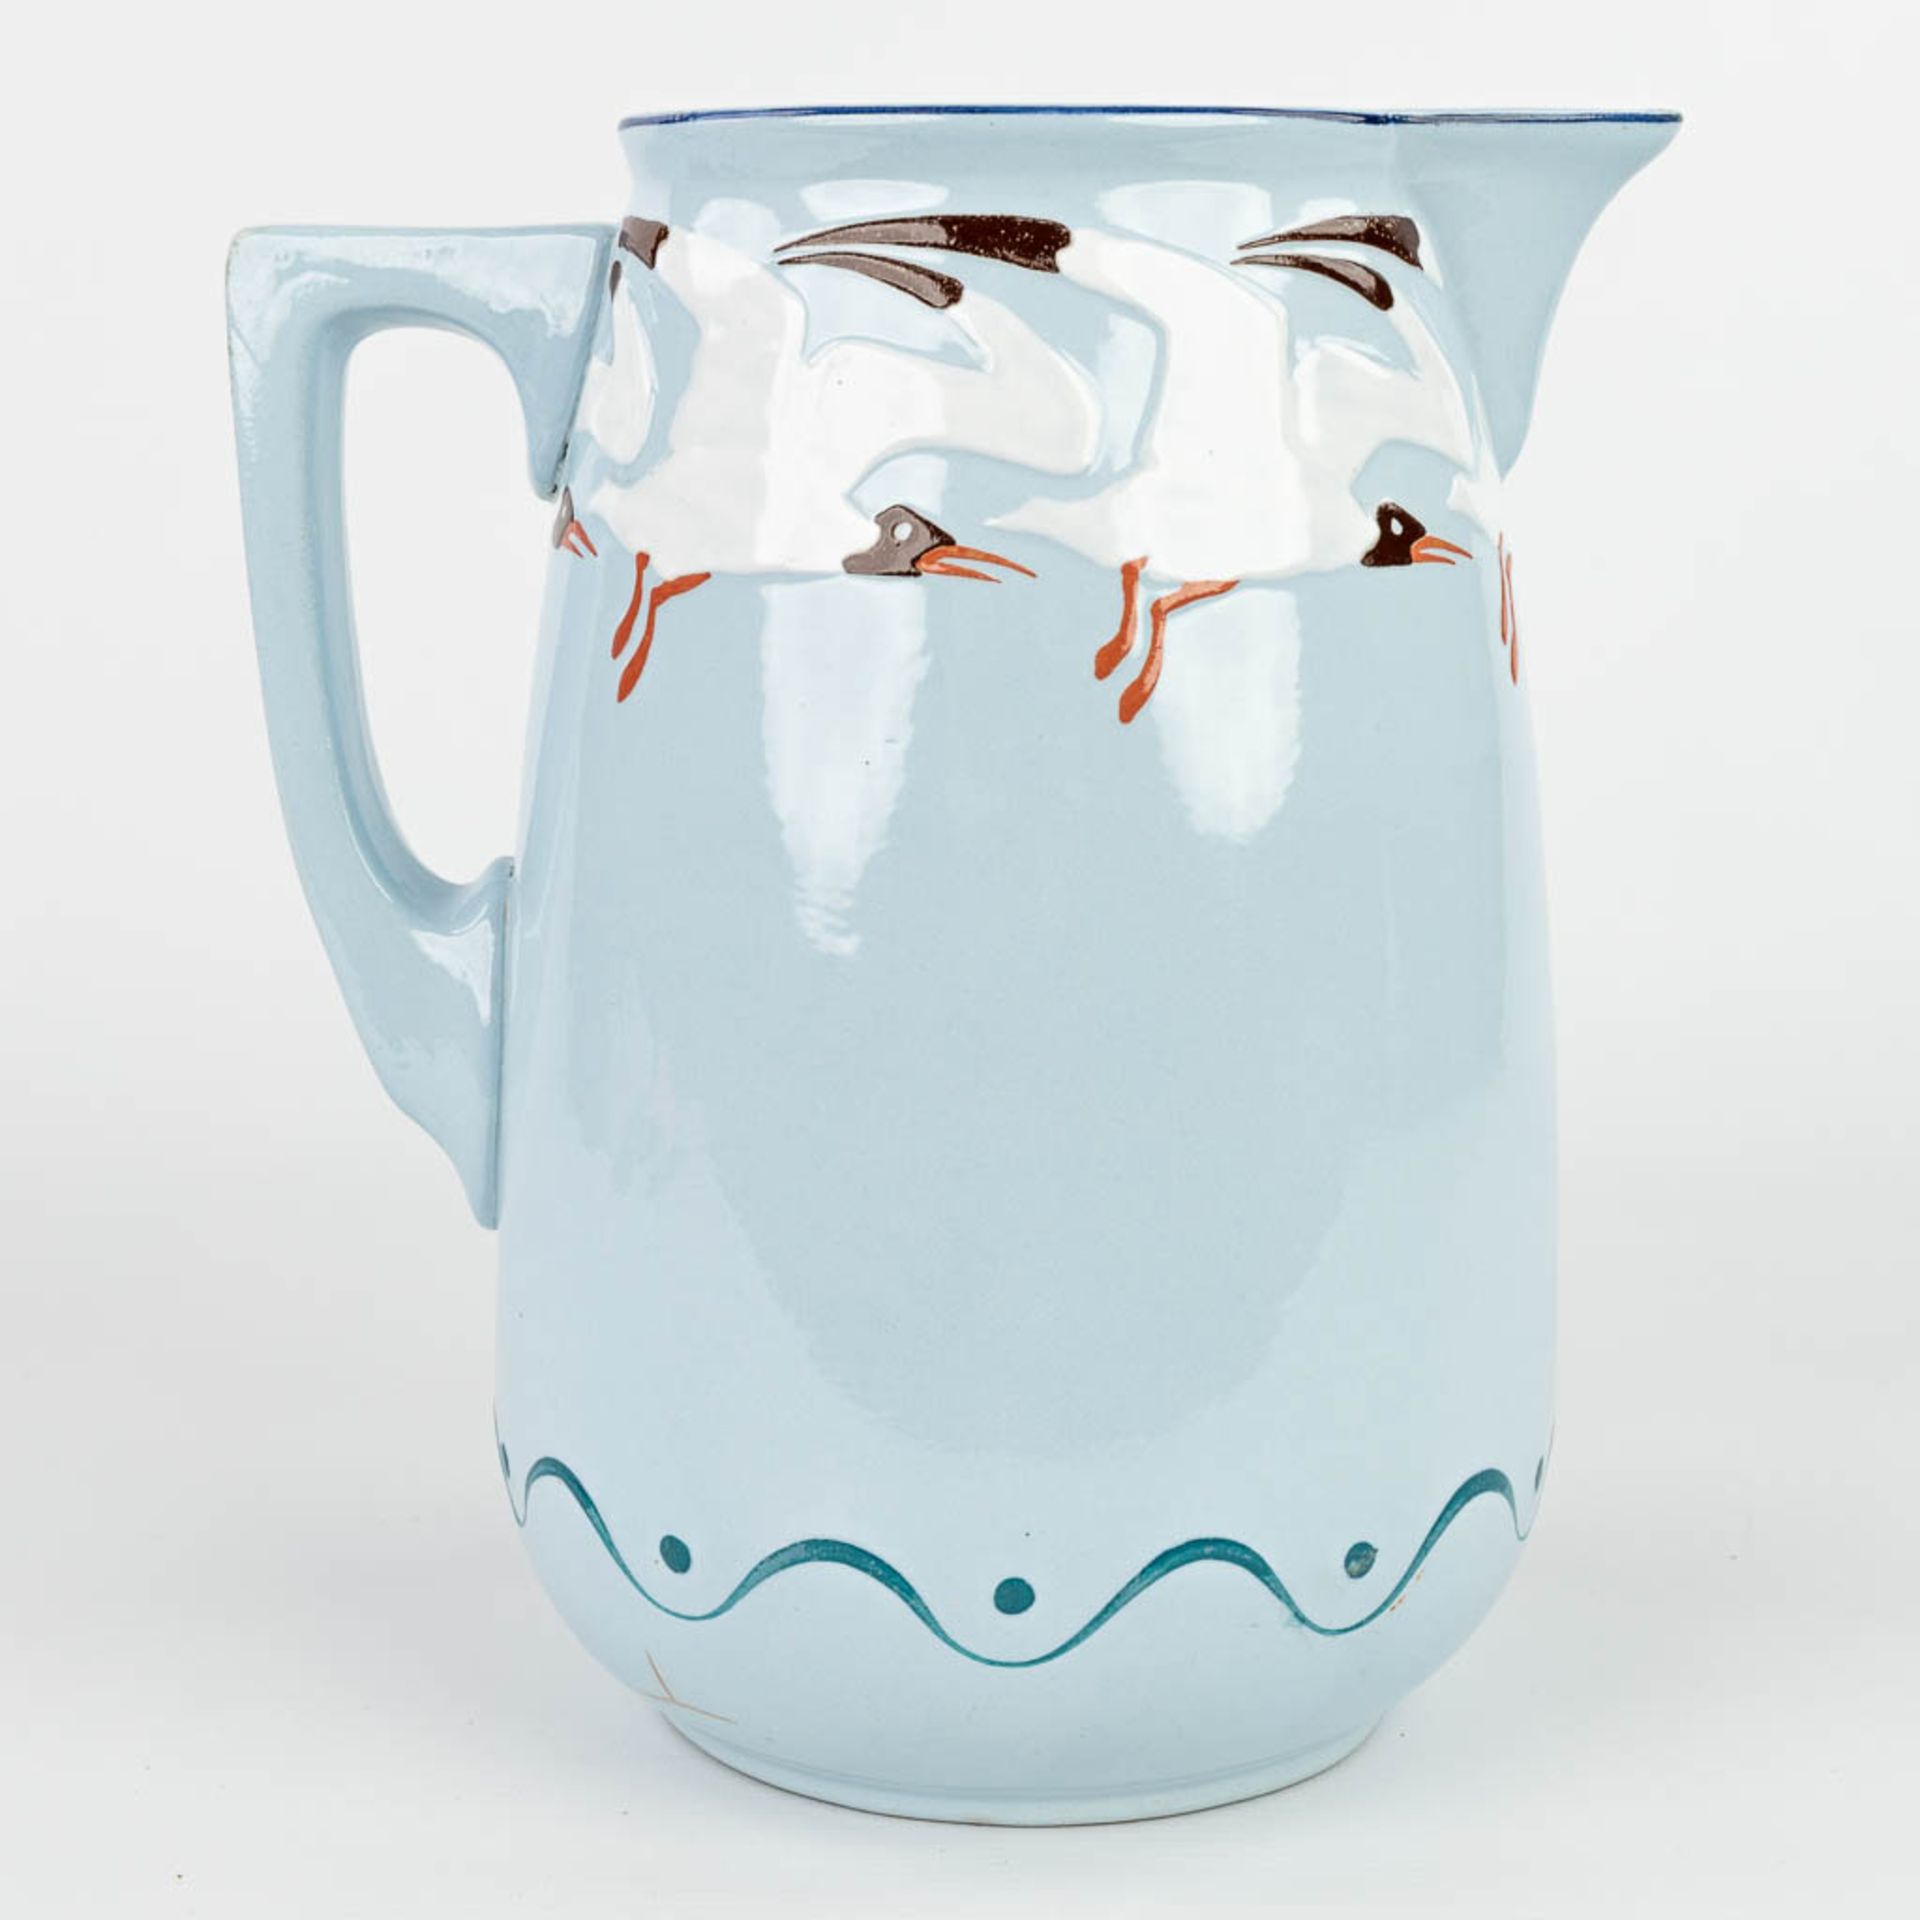 A jug and bowl made in art nouveau style with blue glaze and decorated with seagulls. Marked Sarregu - Image 5 of 20